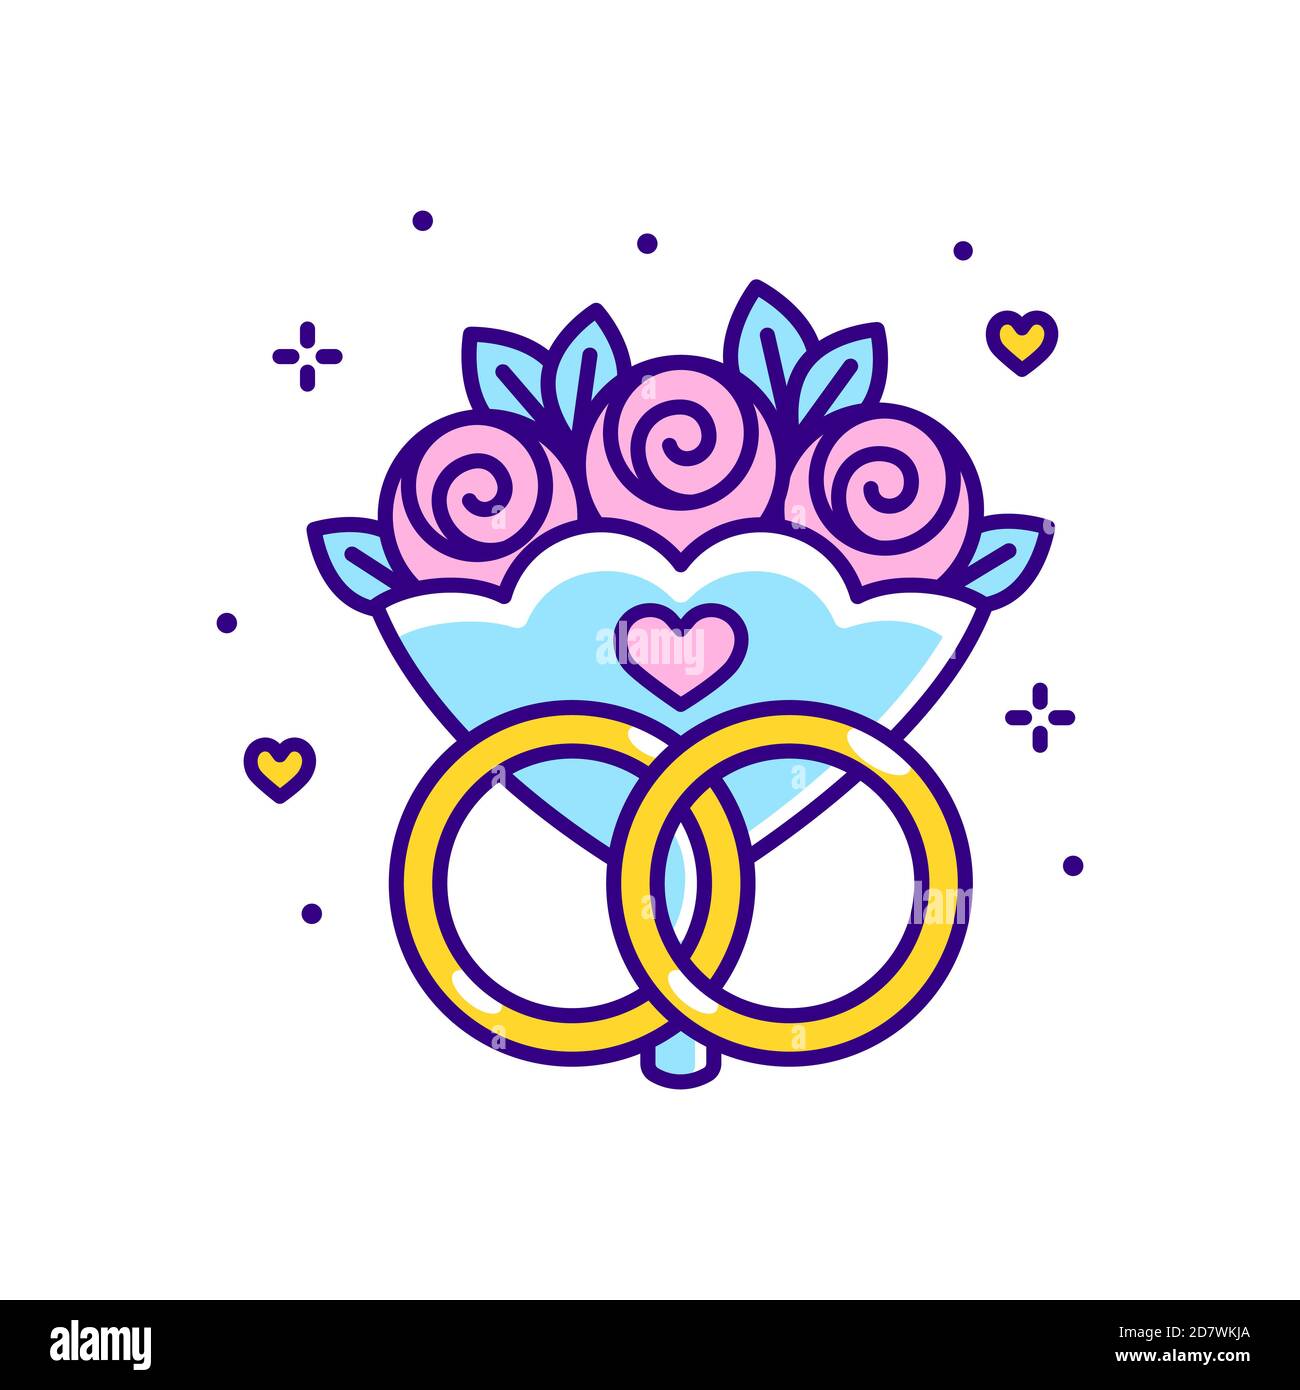 Cartoon wedding symbol, bouquet of roses and two rings. Simple flat line icon style. Isolated vector clip art illustration. Stock Vector